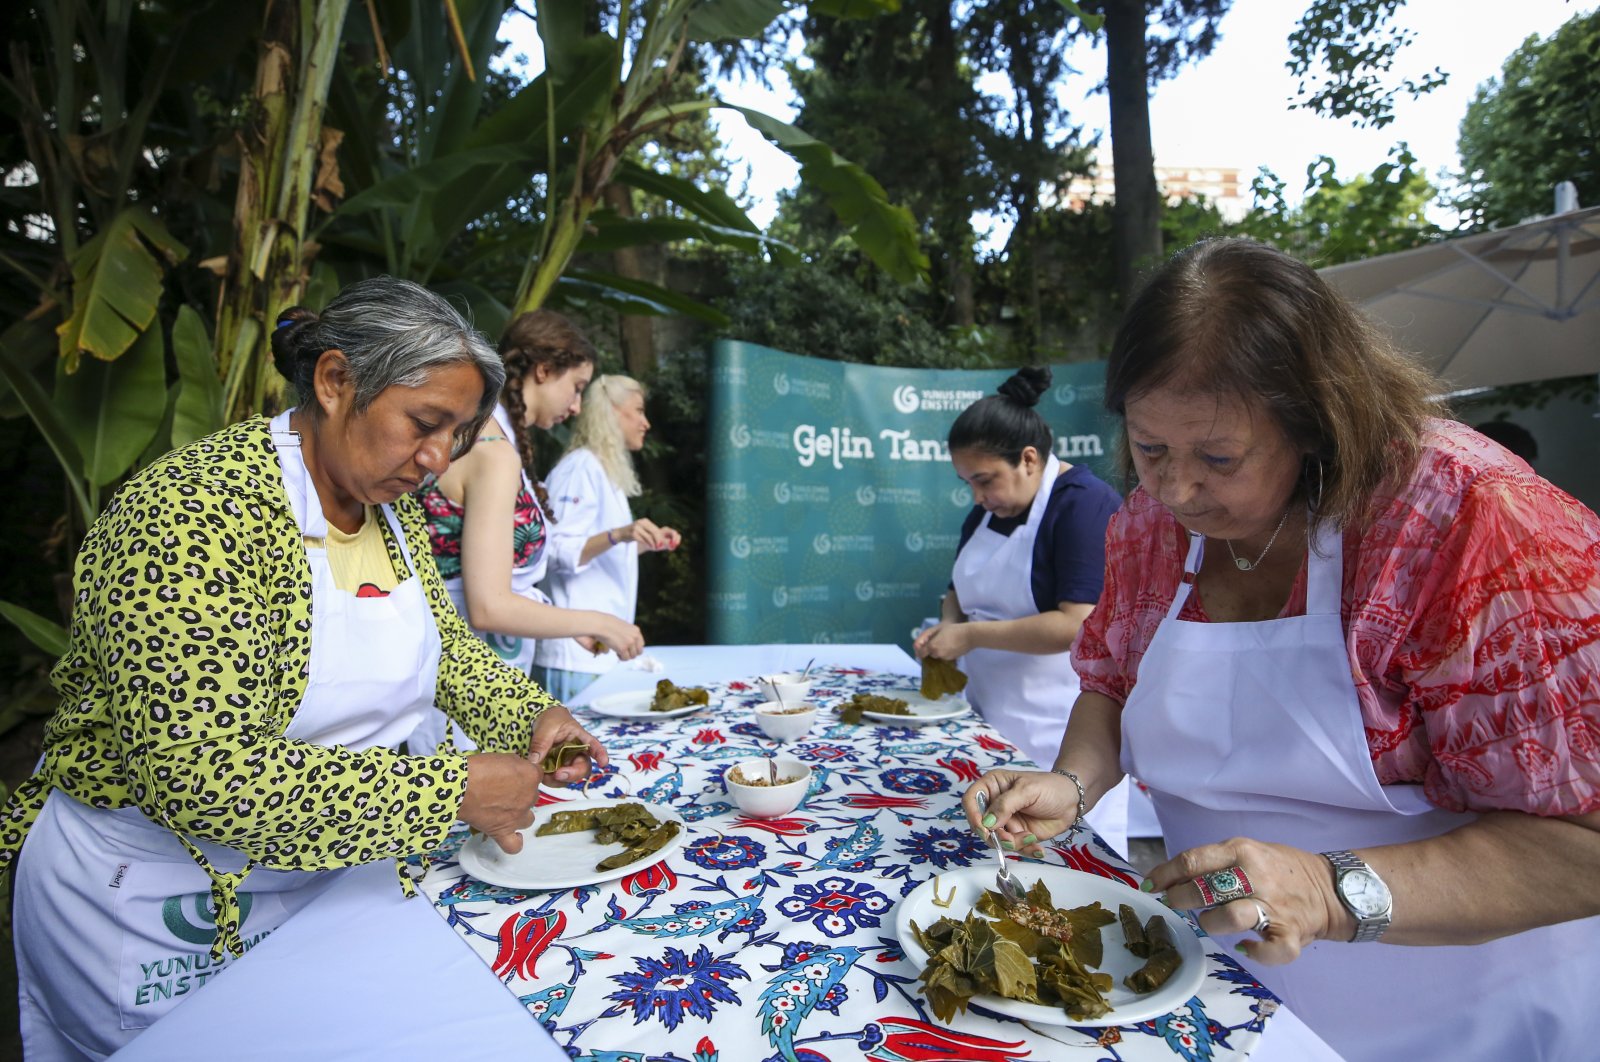 Argentines learn how to make traditional stuffed vine leaves at a workshop on Turkish cuisine in Buenos Aires, Argentina, Dec. 21, 2022. (AA Photo)